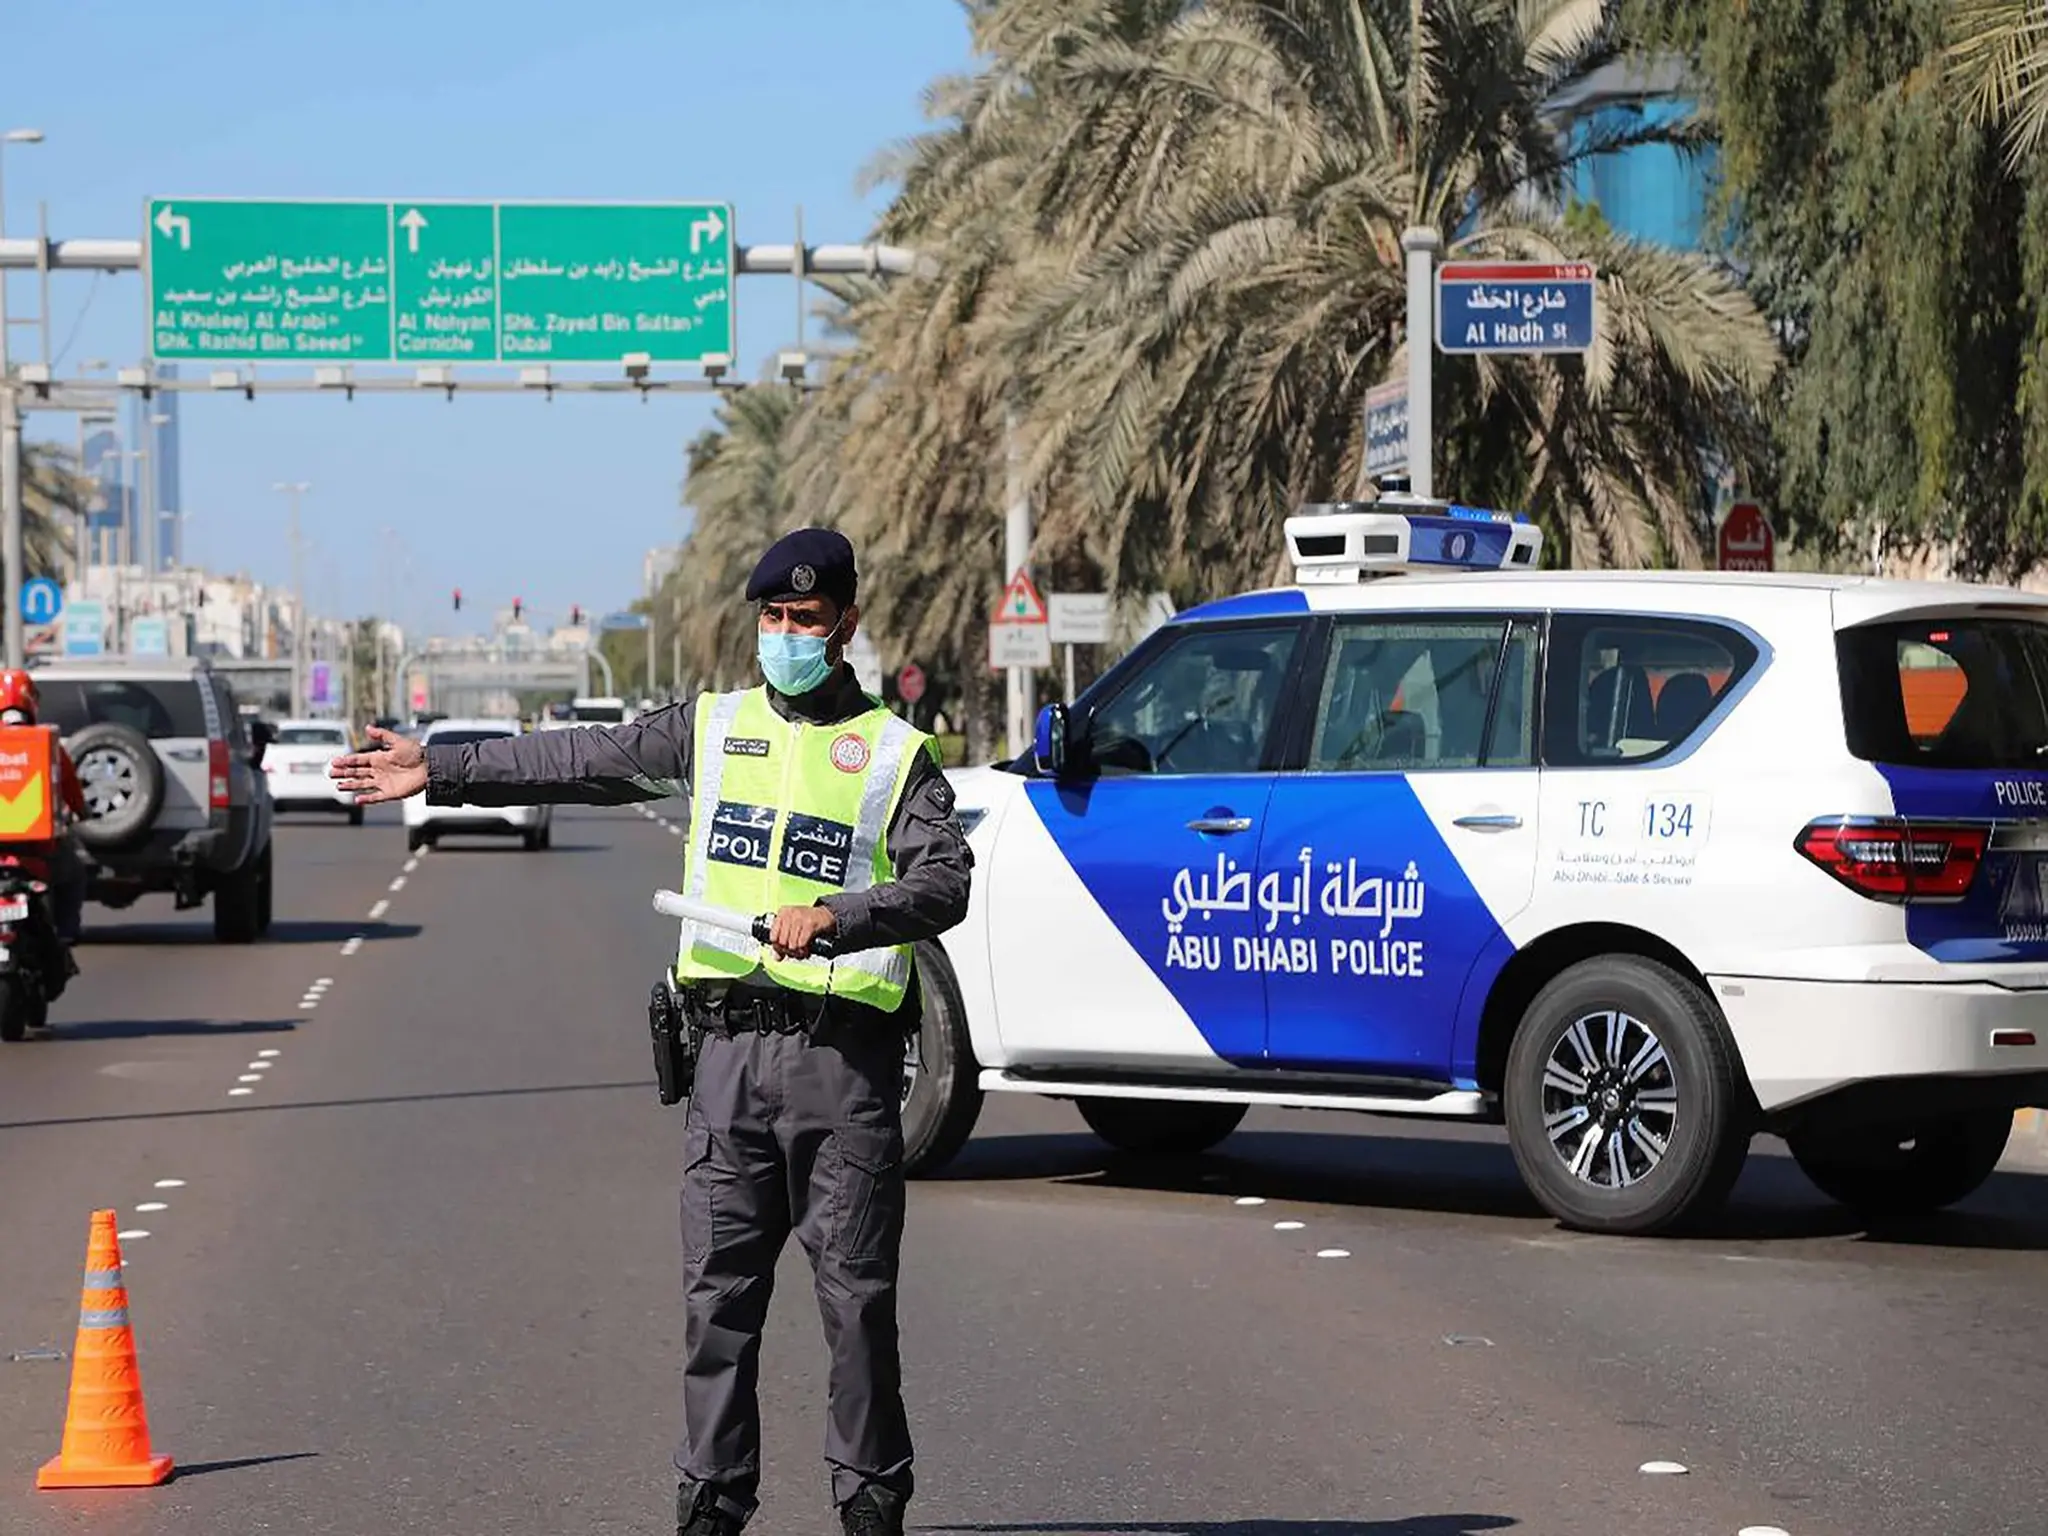 An important warning from "Abu Dhabi Police" to all drivers